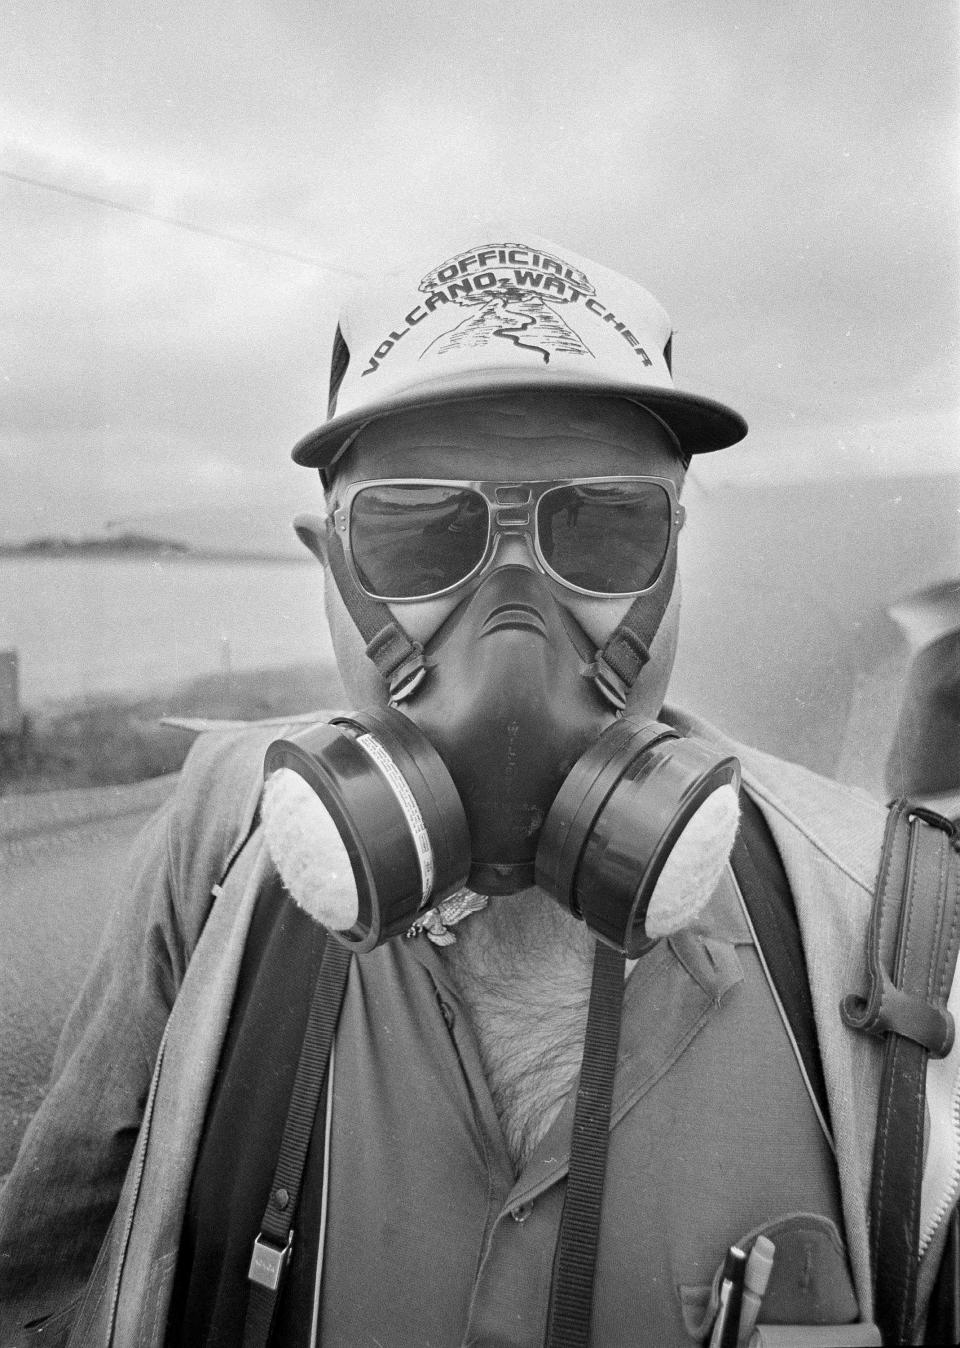 Jan Smith of Castle Rock, Wash., wears a gas mask after Mount St. Helens erupted filling the air with ash and smoke, May 29, 1980. Many areas of the northwest received varying amounts of ash after the May 18 eruption. 